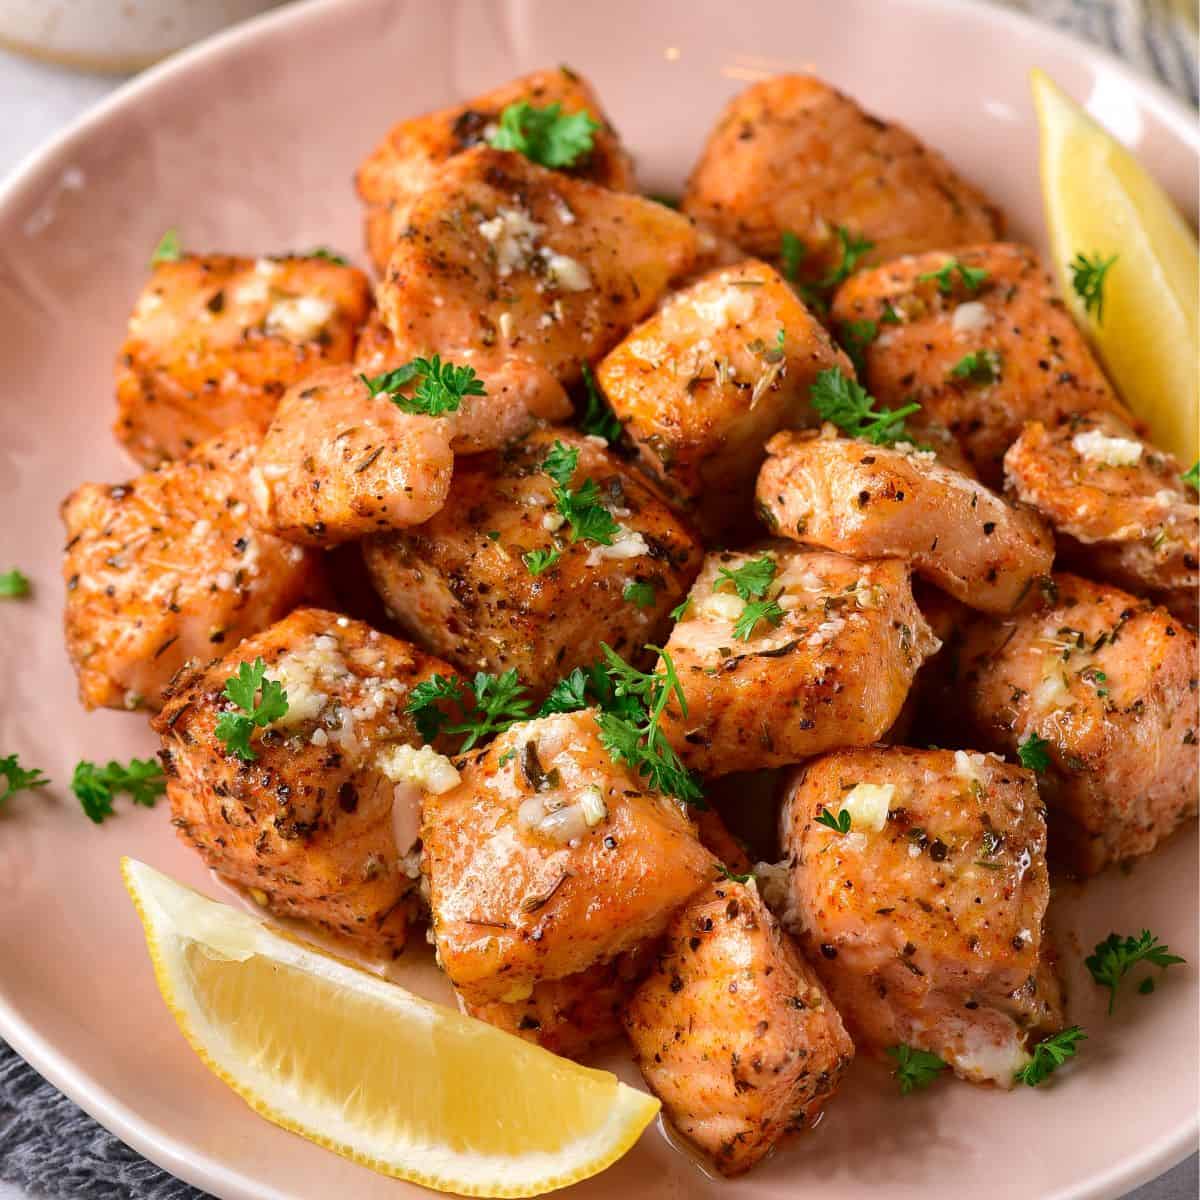 Salmon Bites with slices of lemon on the side